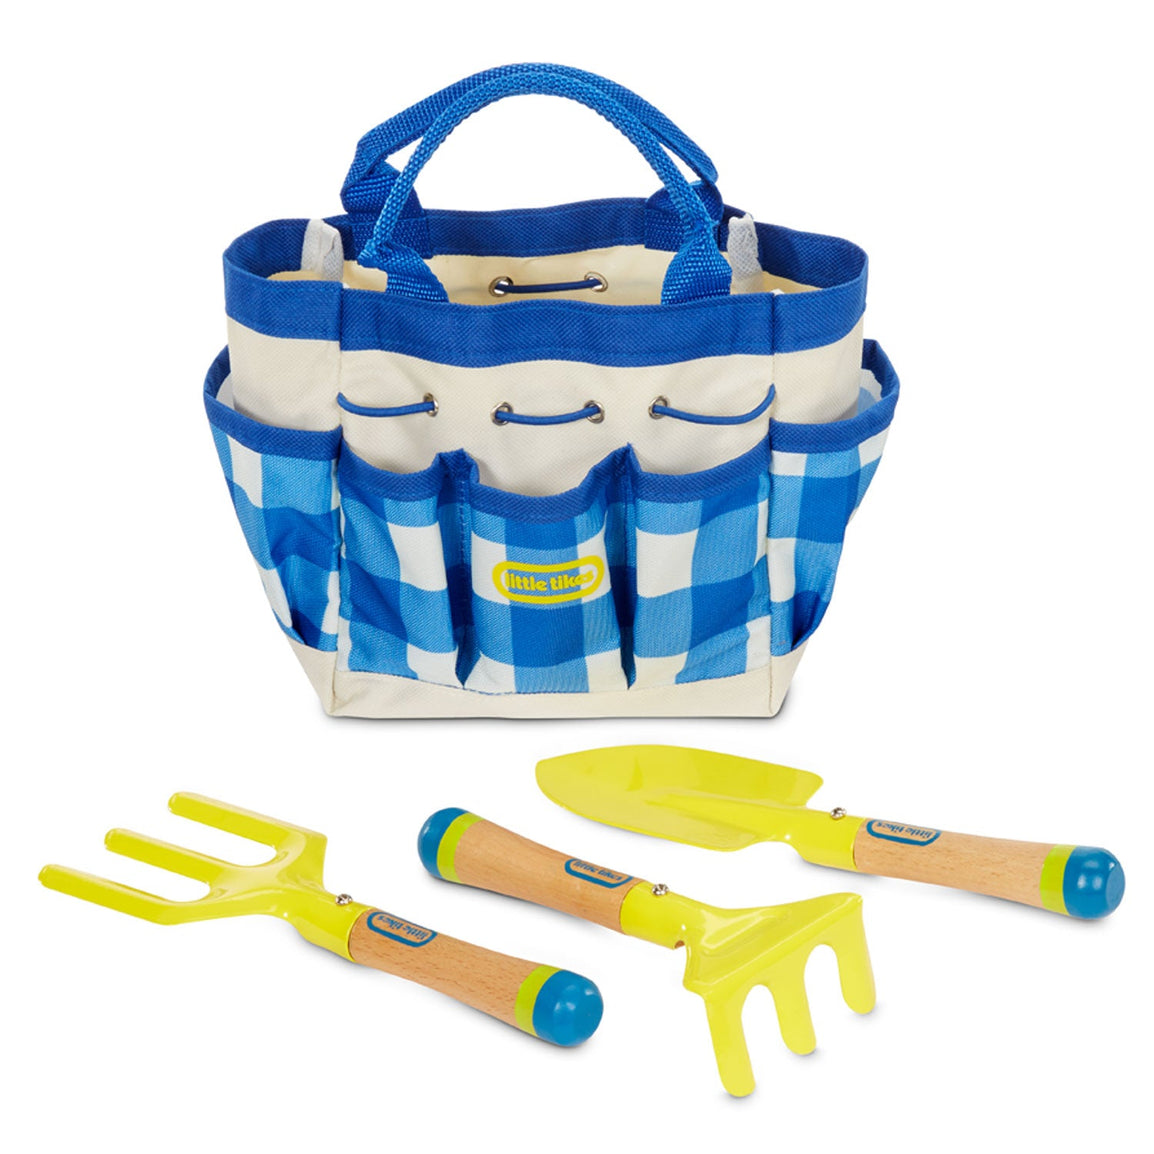 The Hand Tools and Bag are designed for little hands so kids can easily use them around the garden